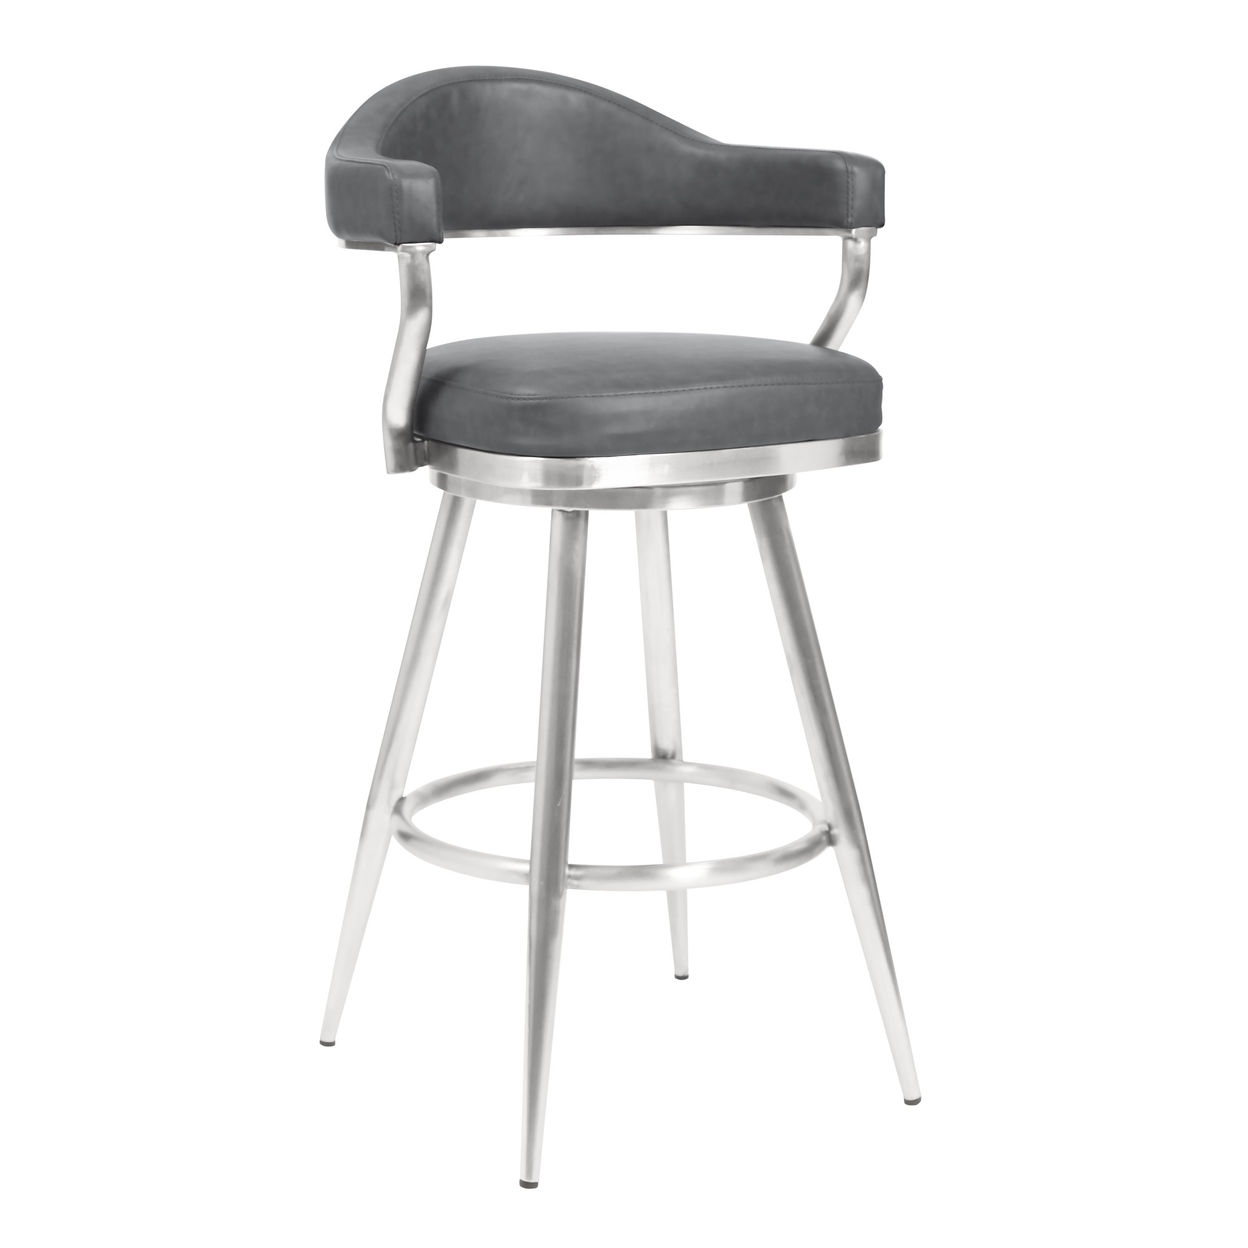 Knw 26 Inch Swivel Counter Stool Chair, Vintage Gray Faux Leather, Chrome- Saltoro Sherpi